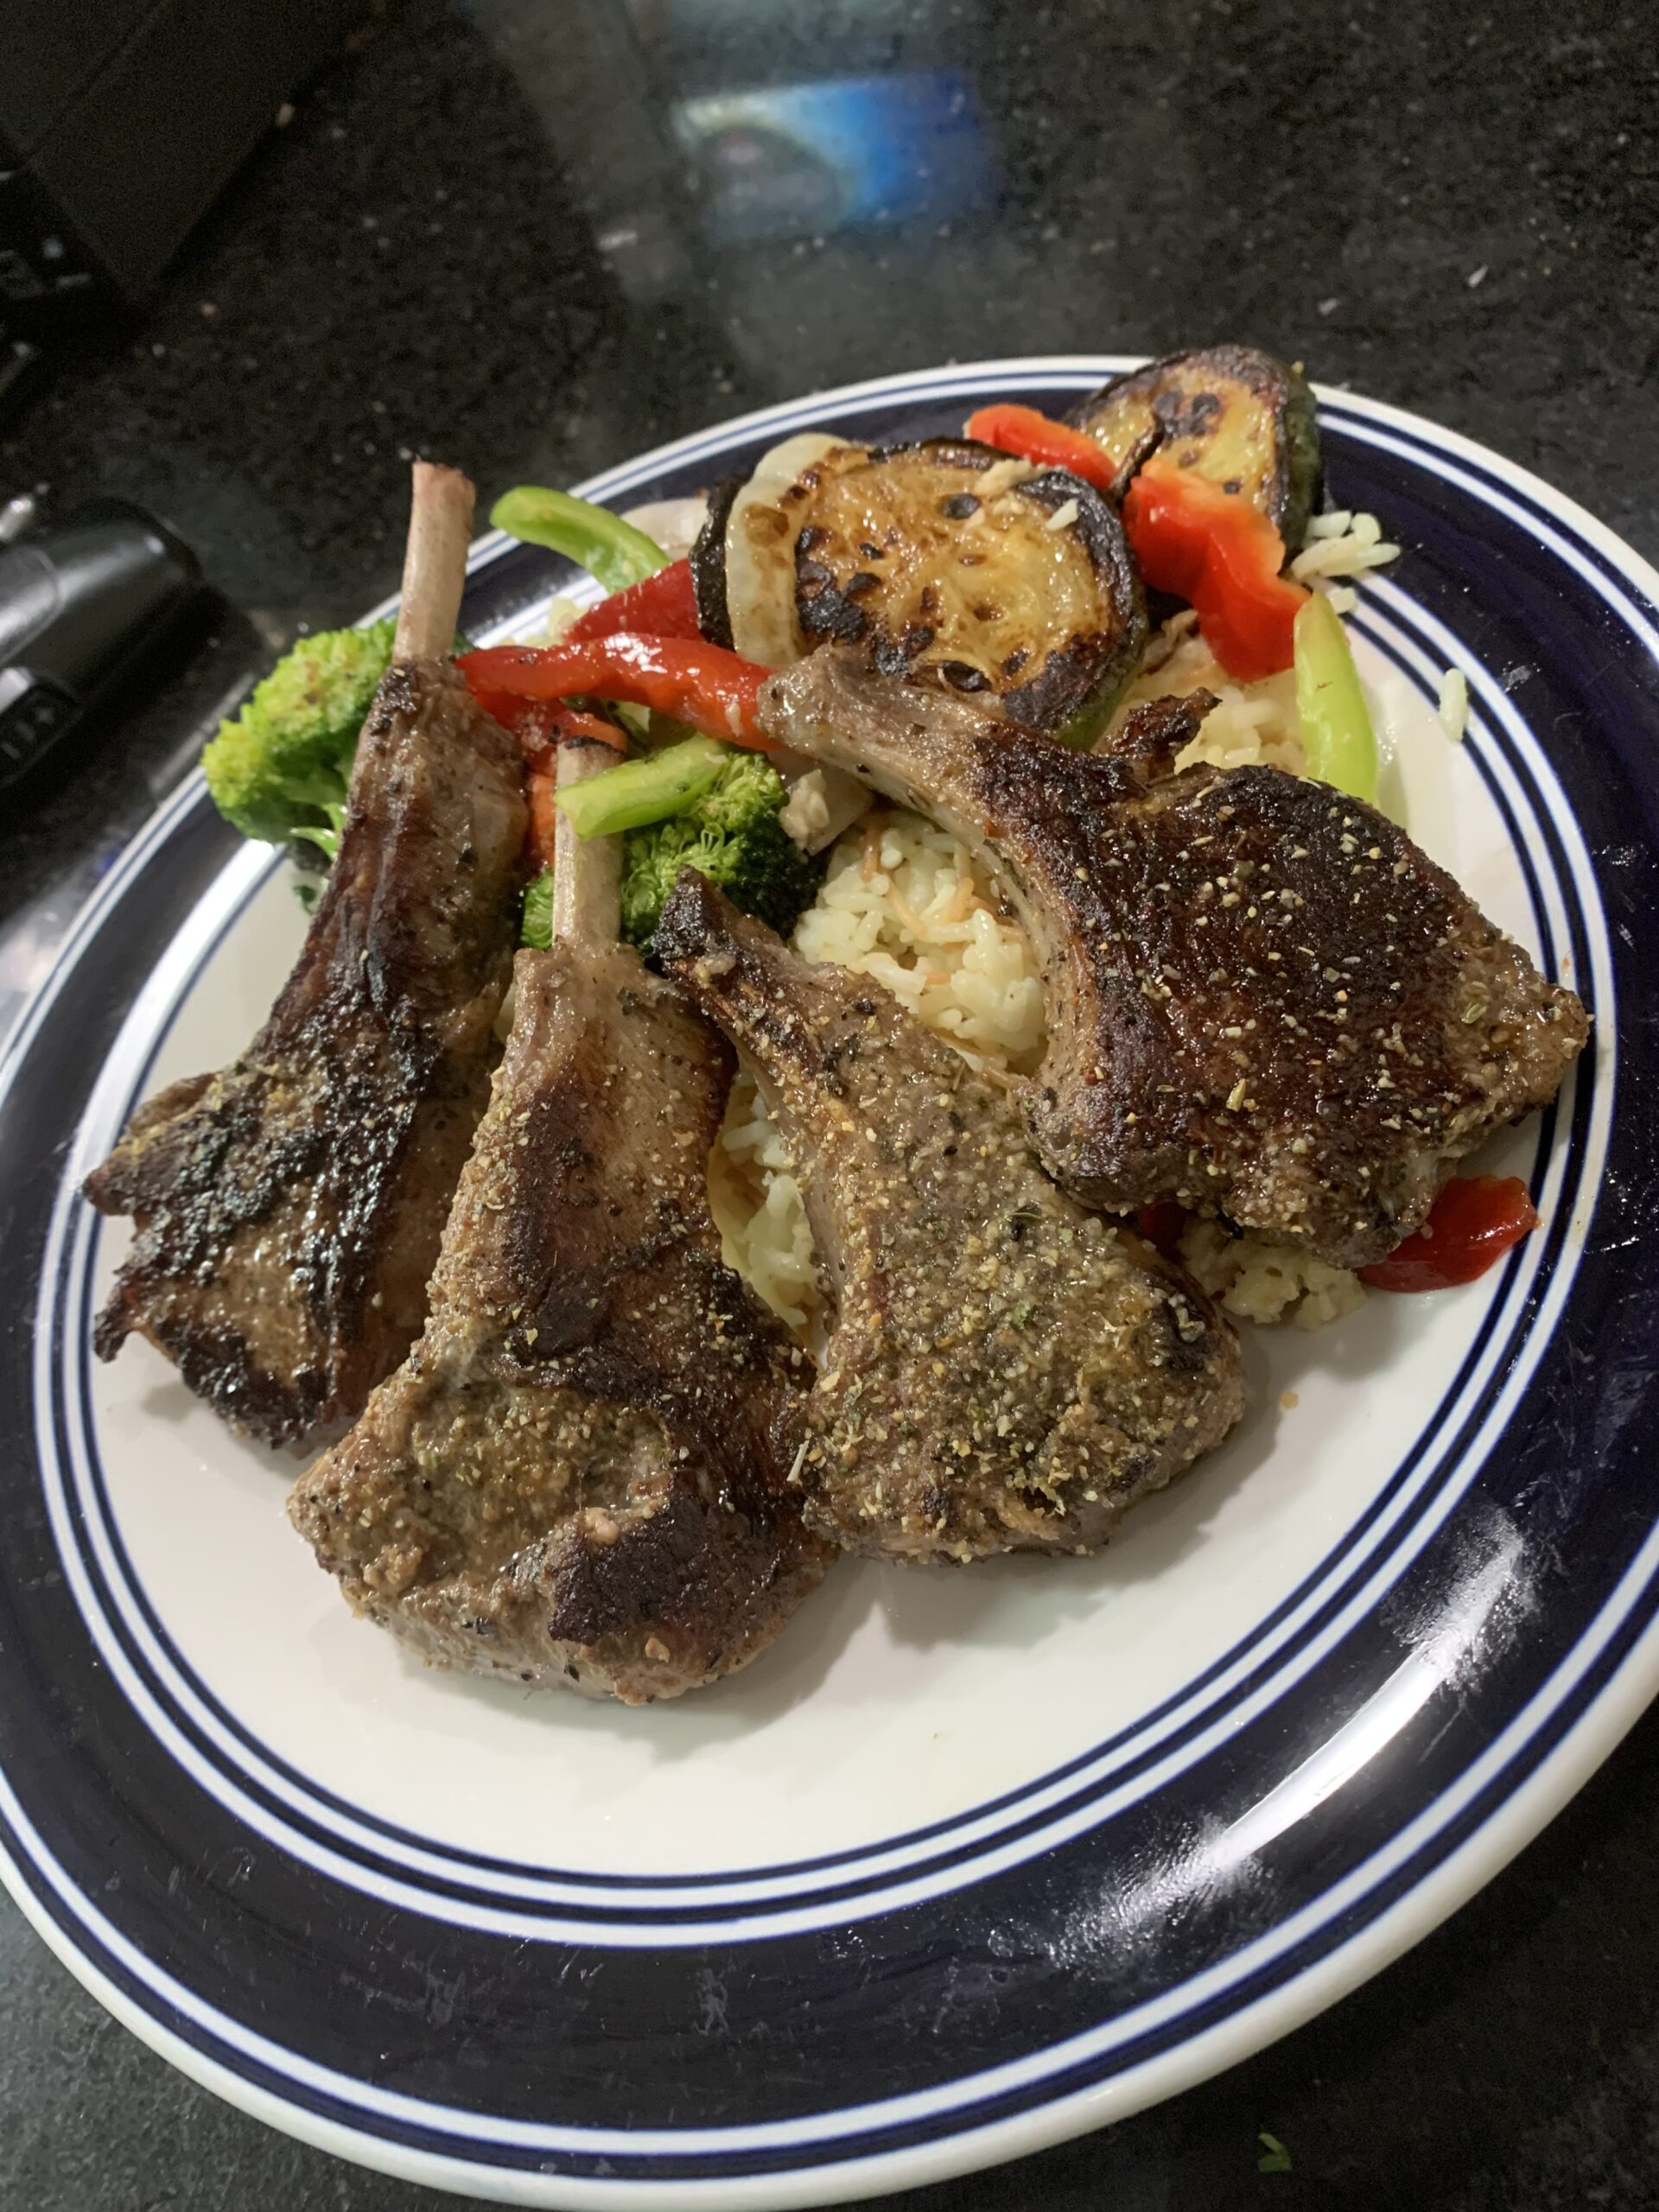 Lamb Chops - Grilled lamb, cooked to your satisfaction. served with middle eastern salad and hummus